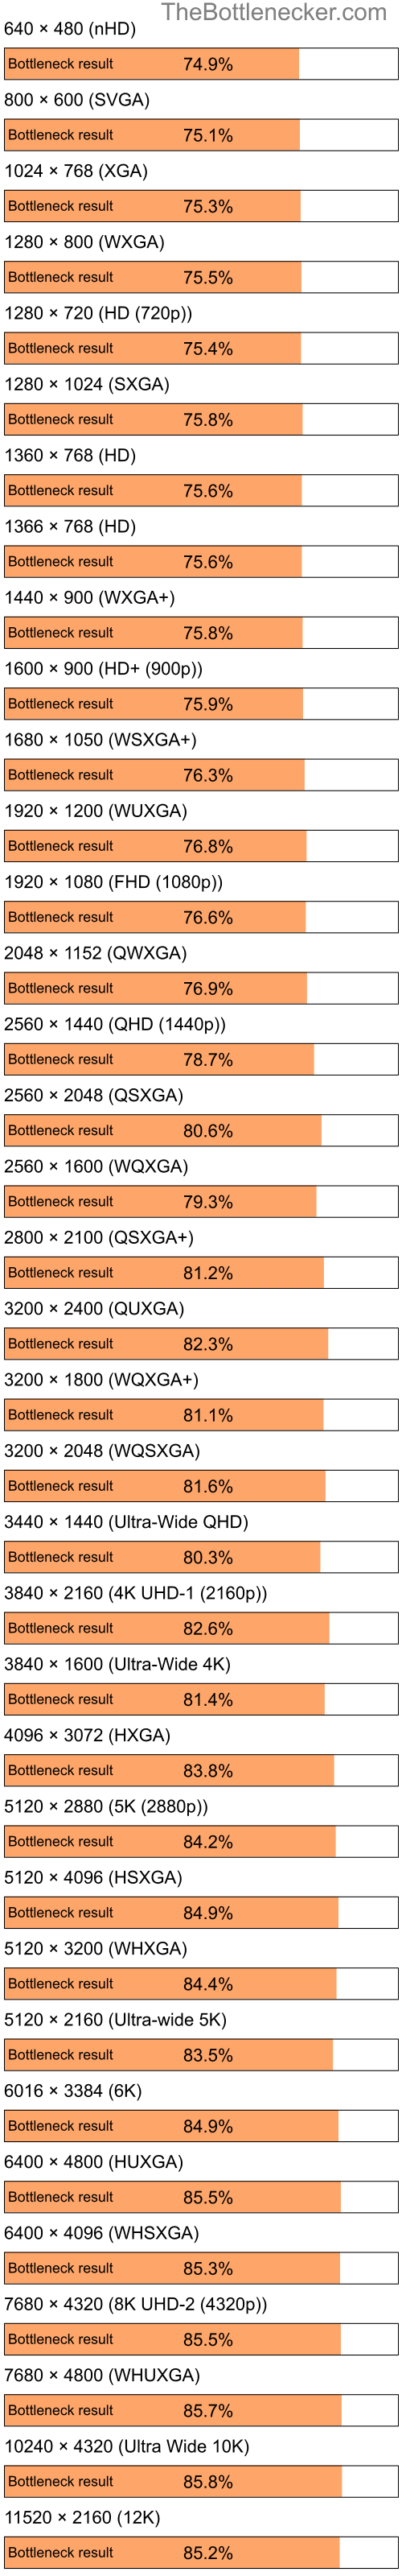 Bottleneck results by resolution for Intel Pentium 4 and NVIDIA GeForce Go 7300 in Graphic Card Intense Tasks